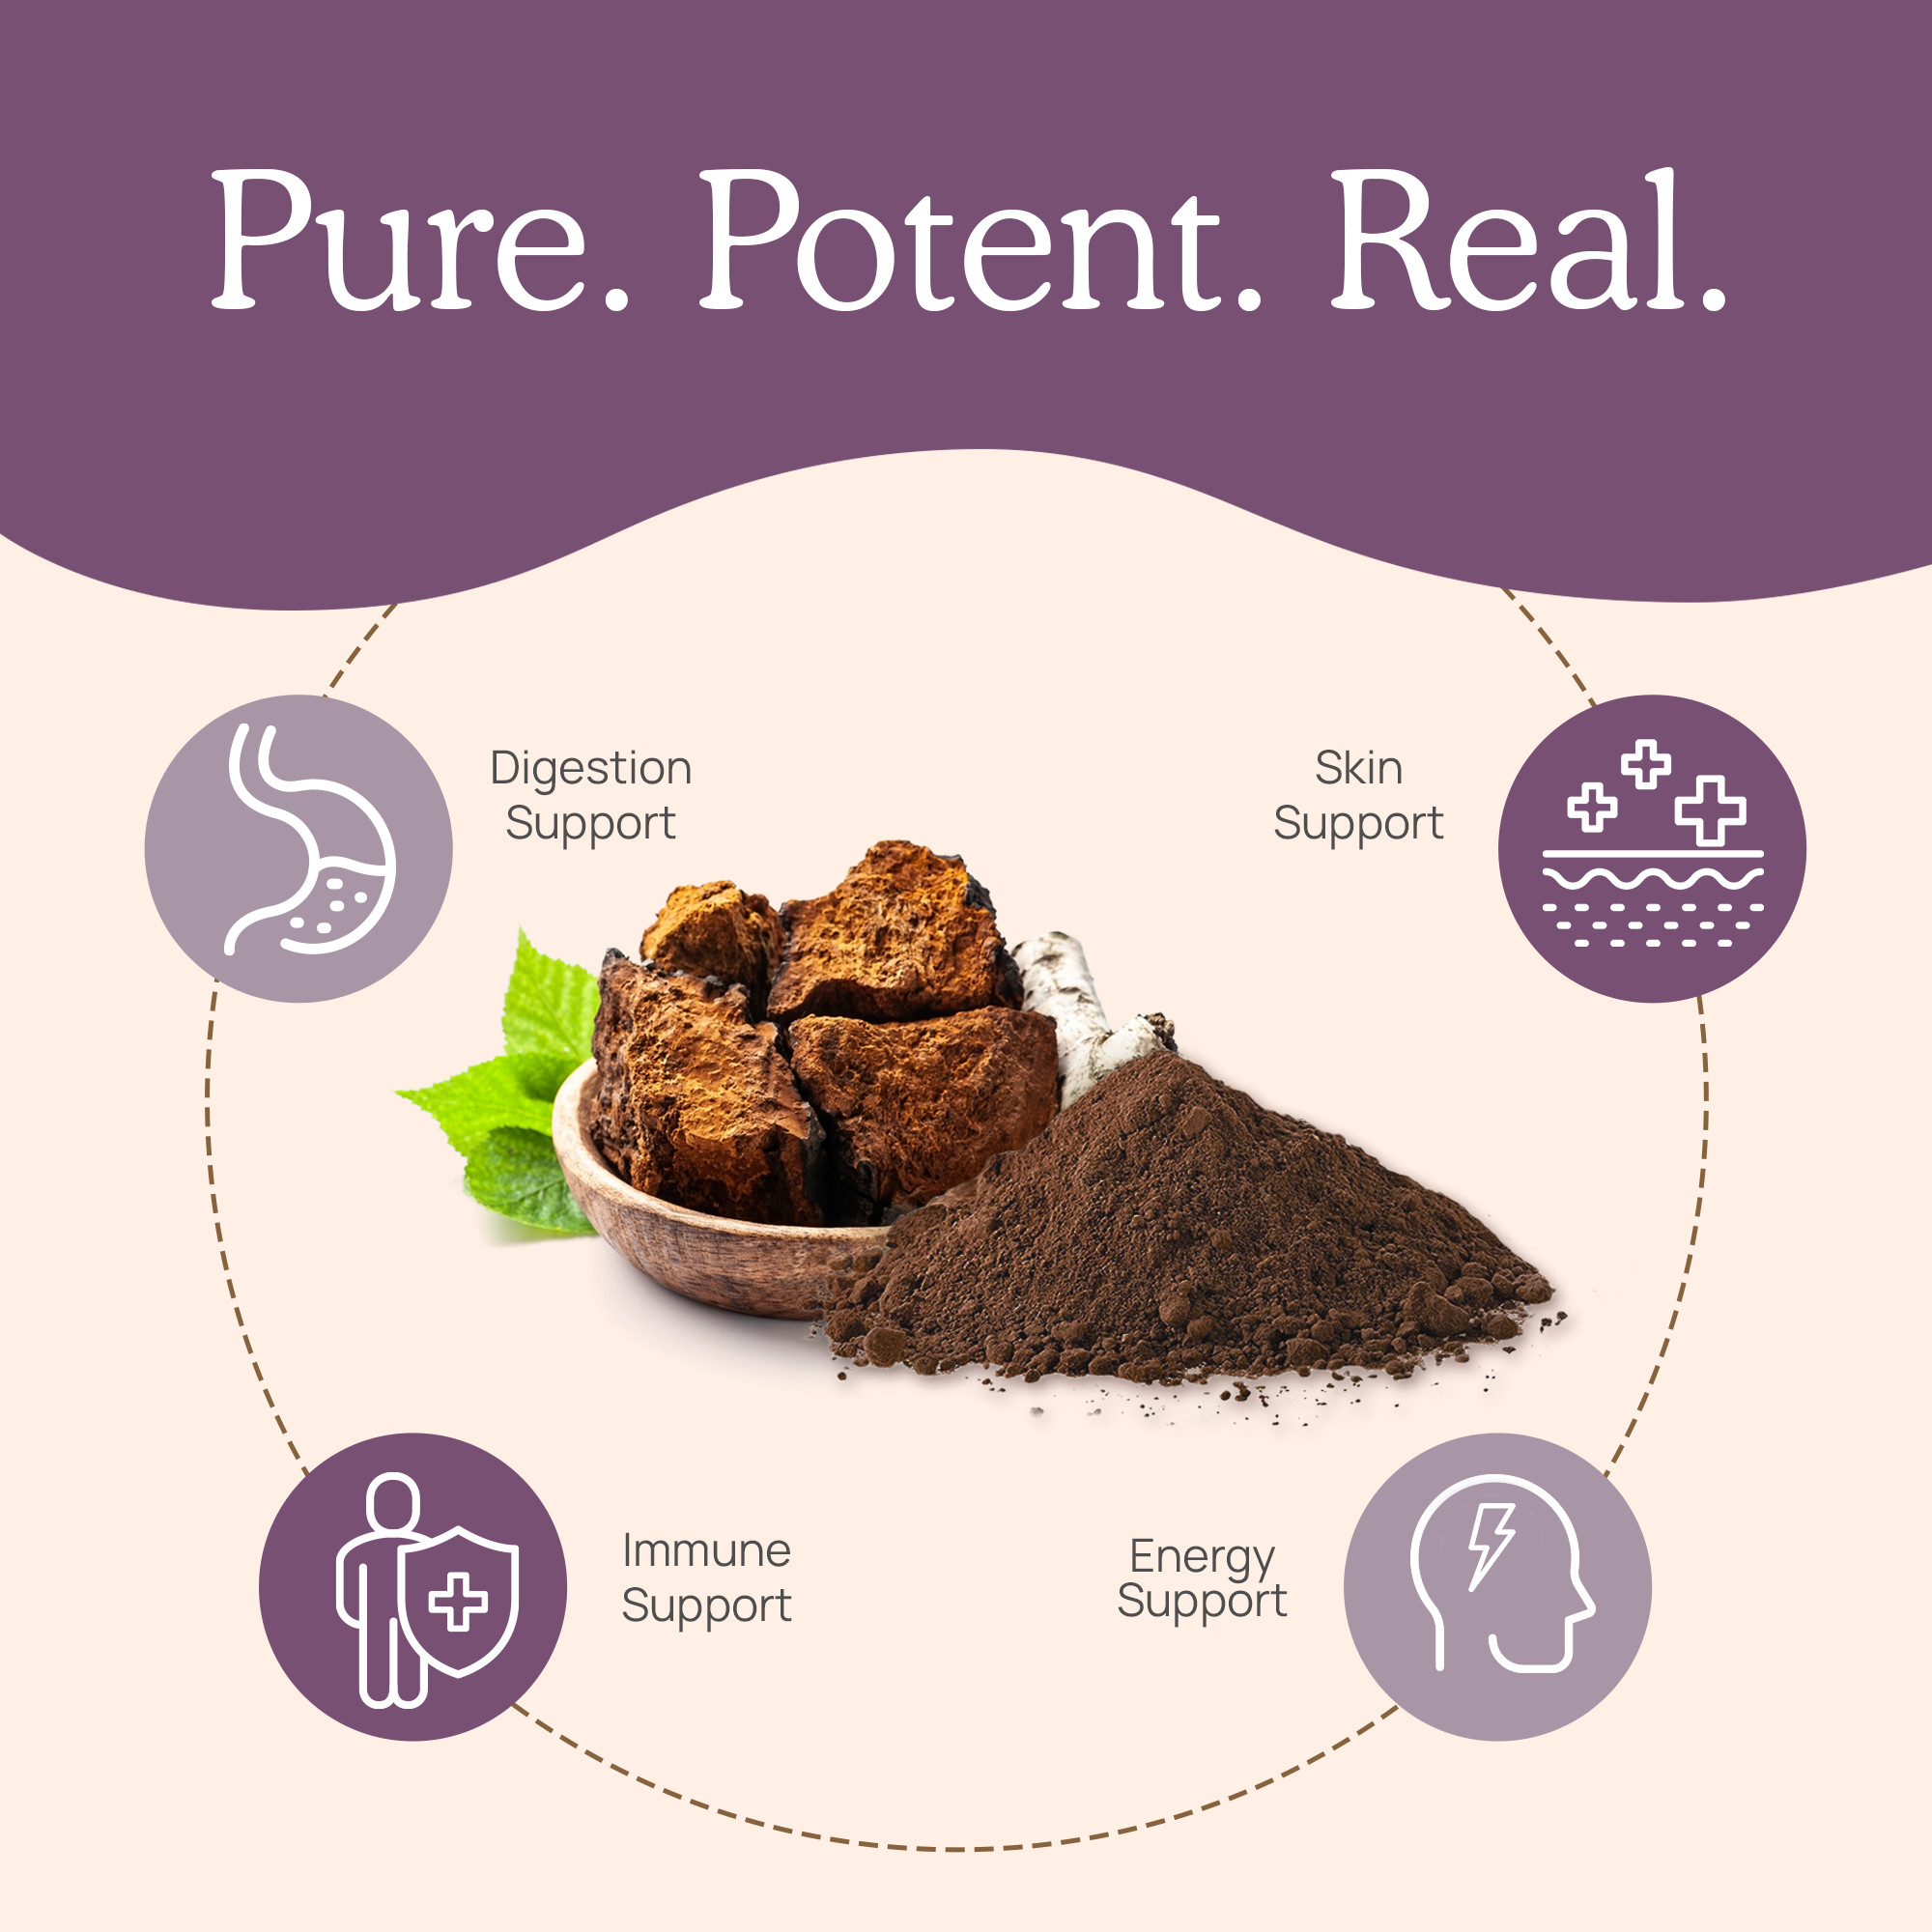 Organic Chaga Extract Capsules for Pets